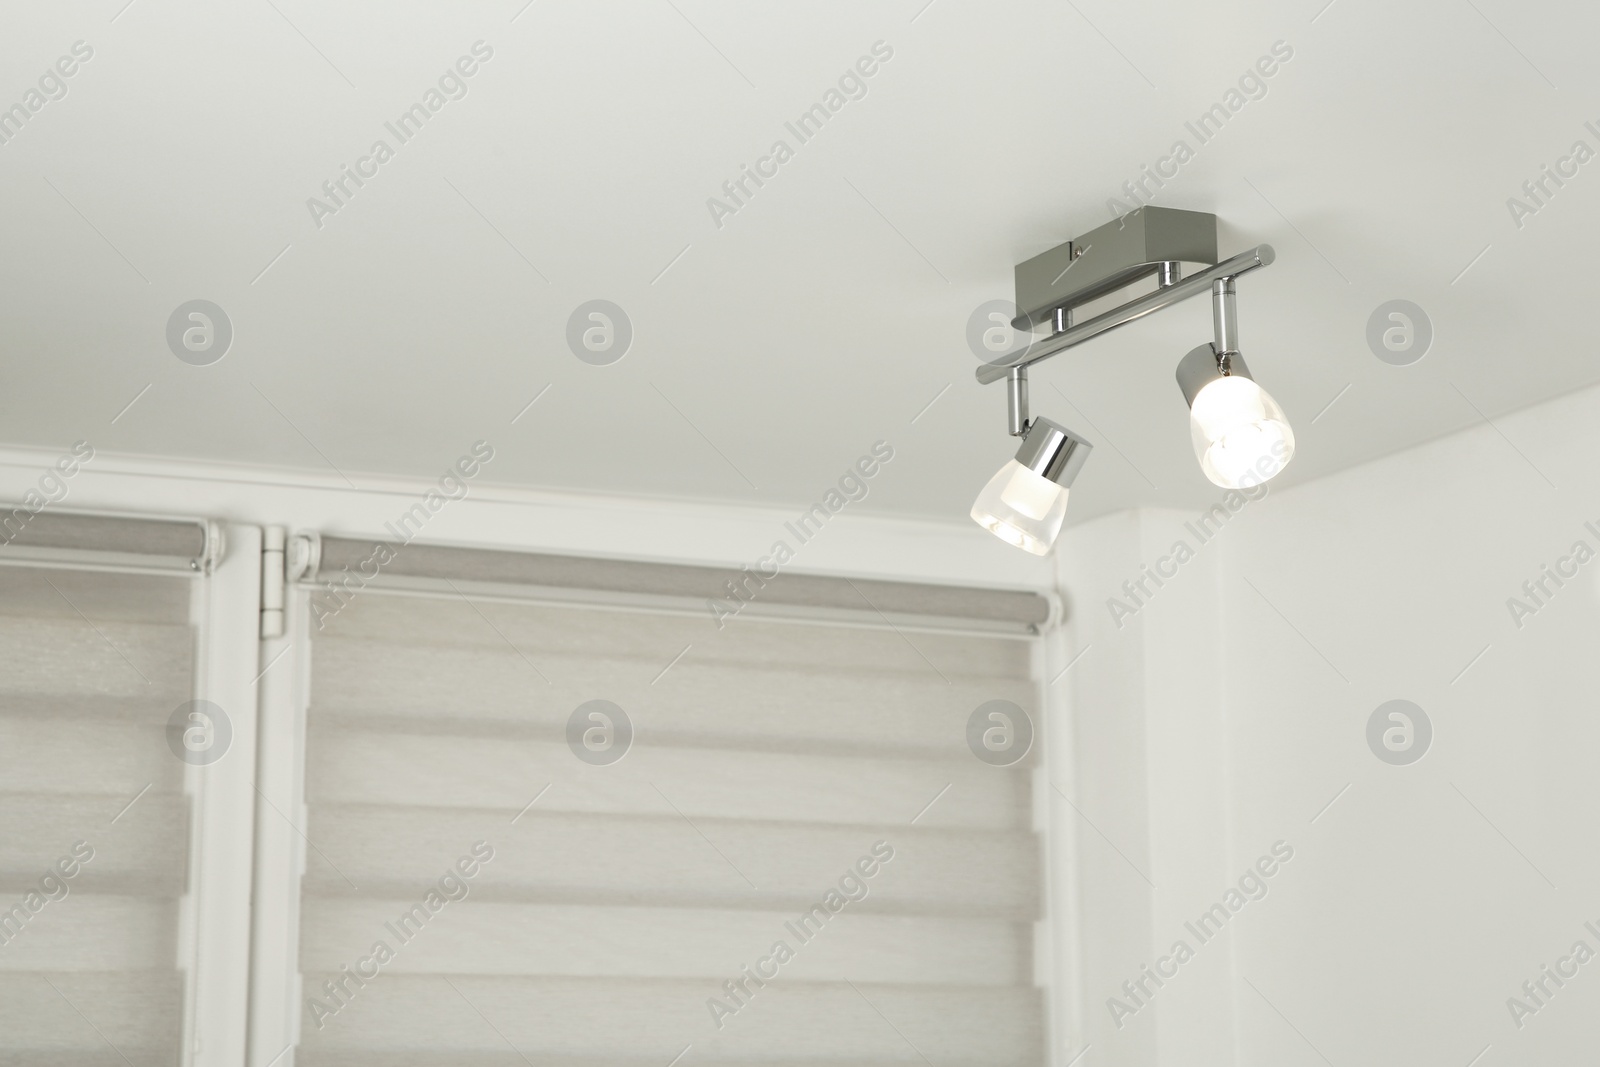 Photo of Stylish light fixture on ceiling indoors, low angle view